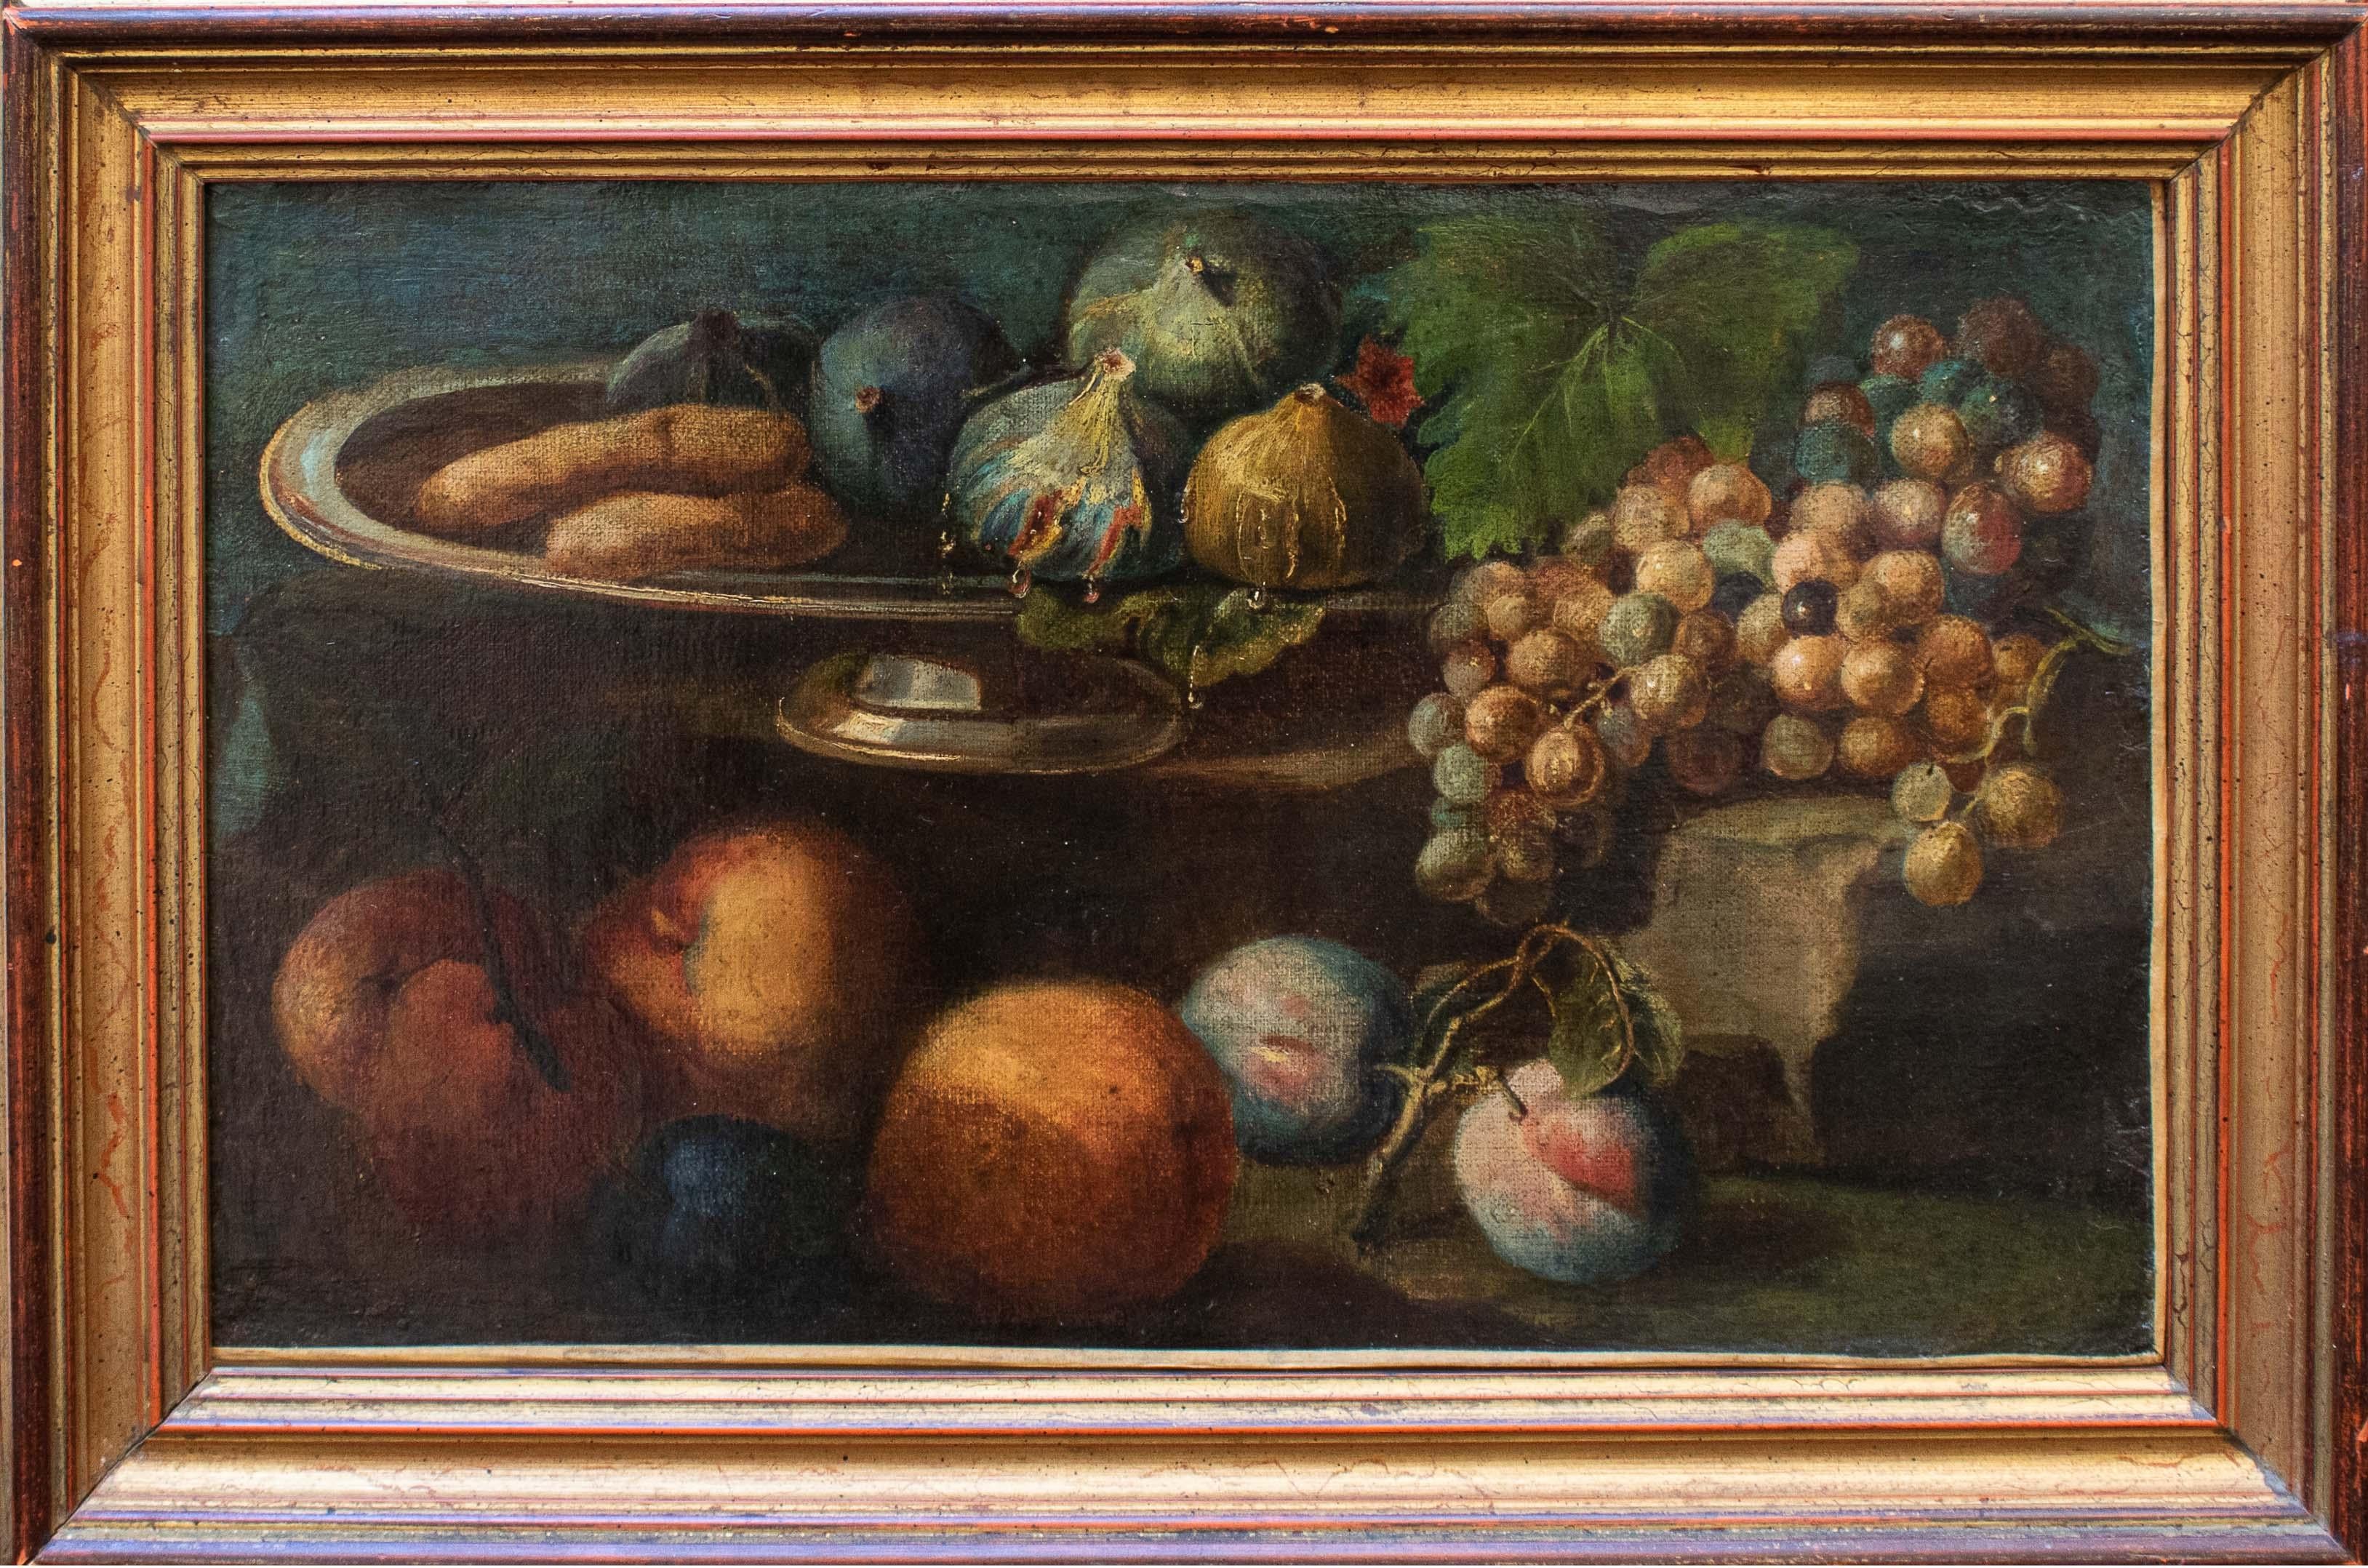 Emilian school, 18th century
Still life with fruit and biscuits
Oil on canvas, 32 x 52.5 cm - with frame 44.5 x 64 x 5.5 cm

Composite still life enlivened by a colorful arrangement of fruits. The compositional plans are also highlighted by the